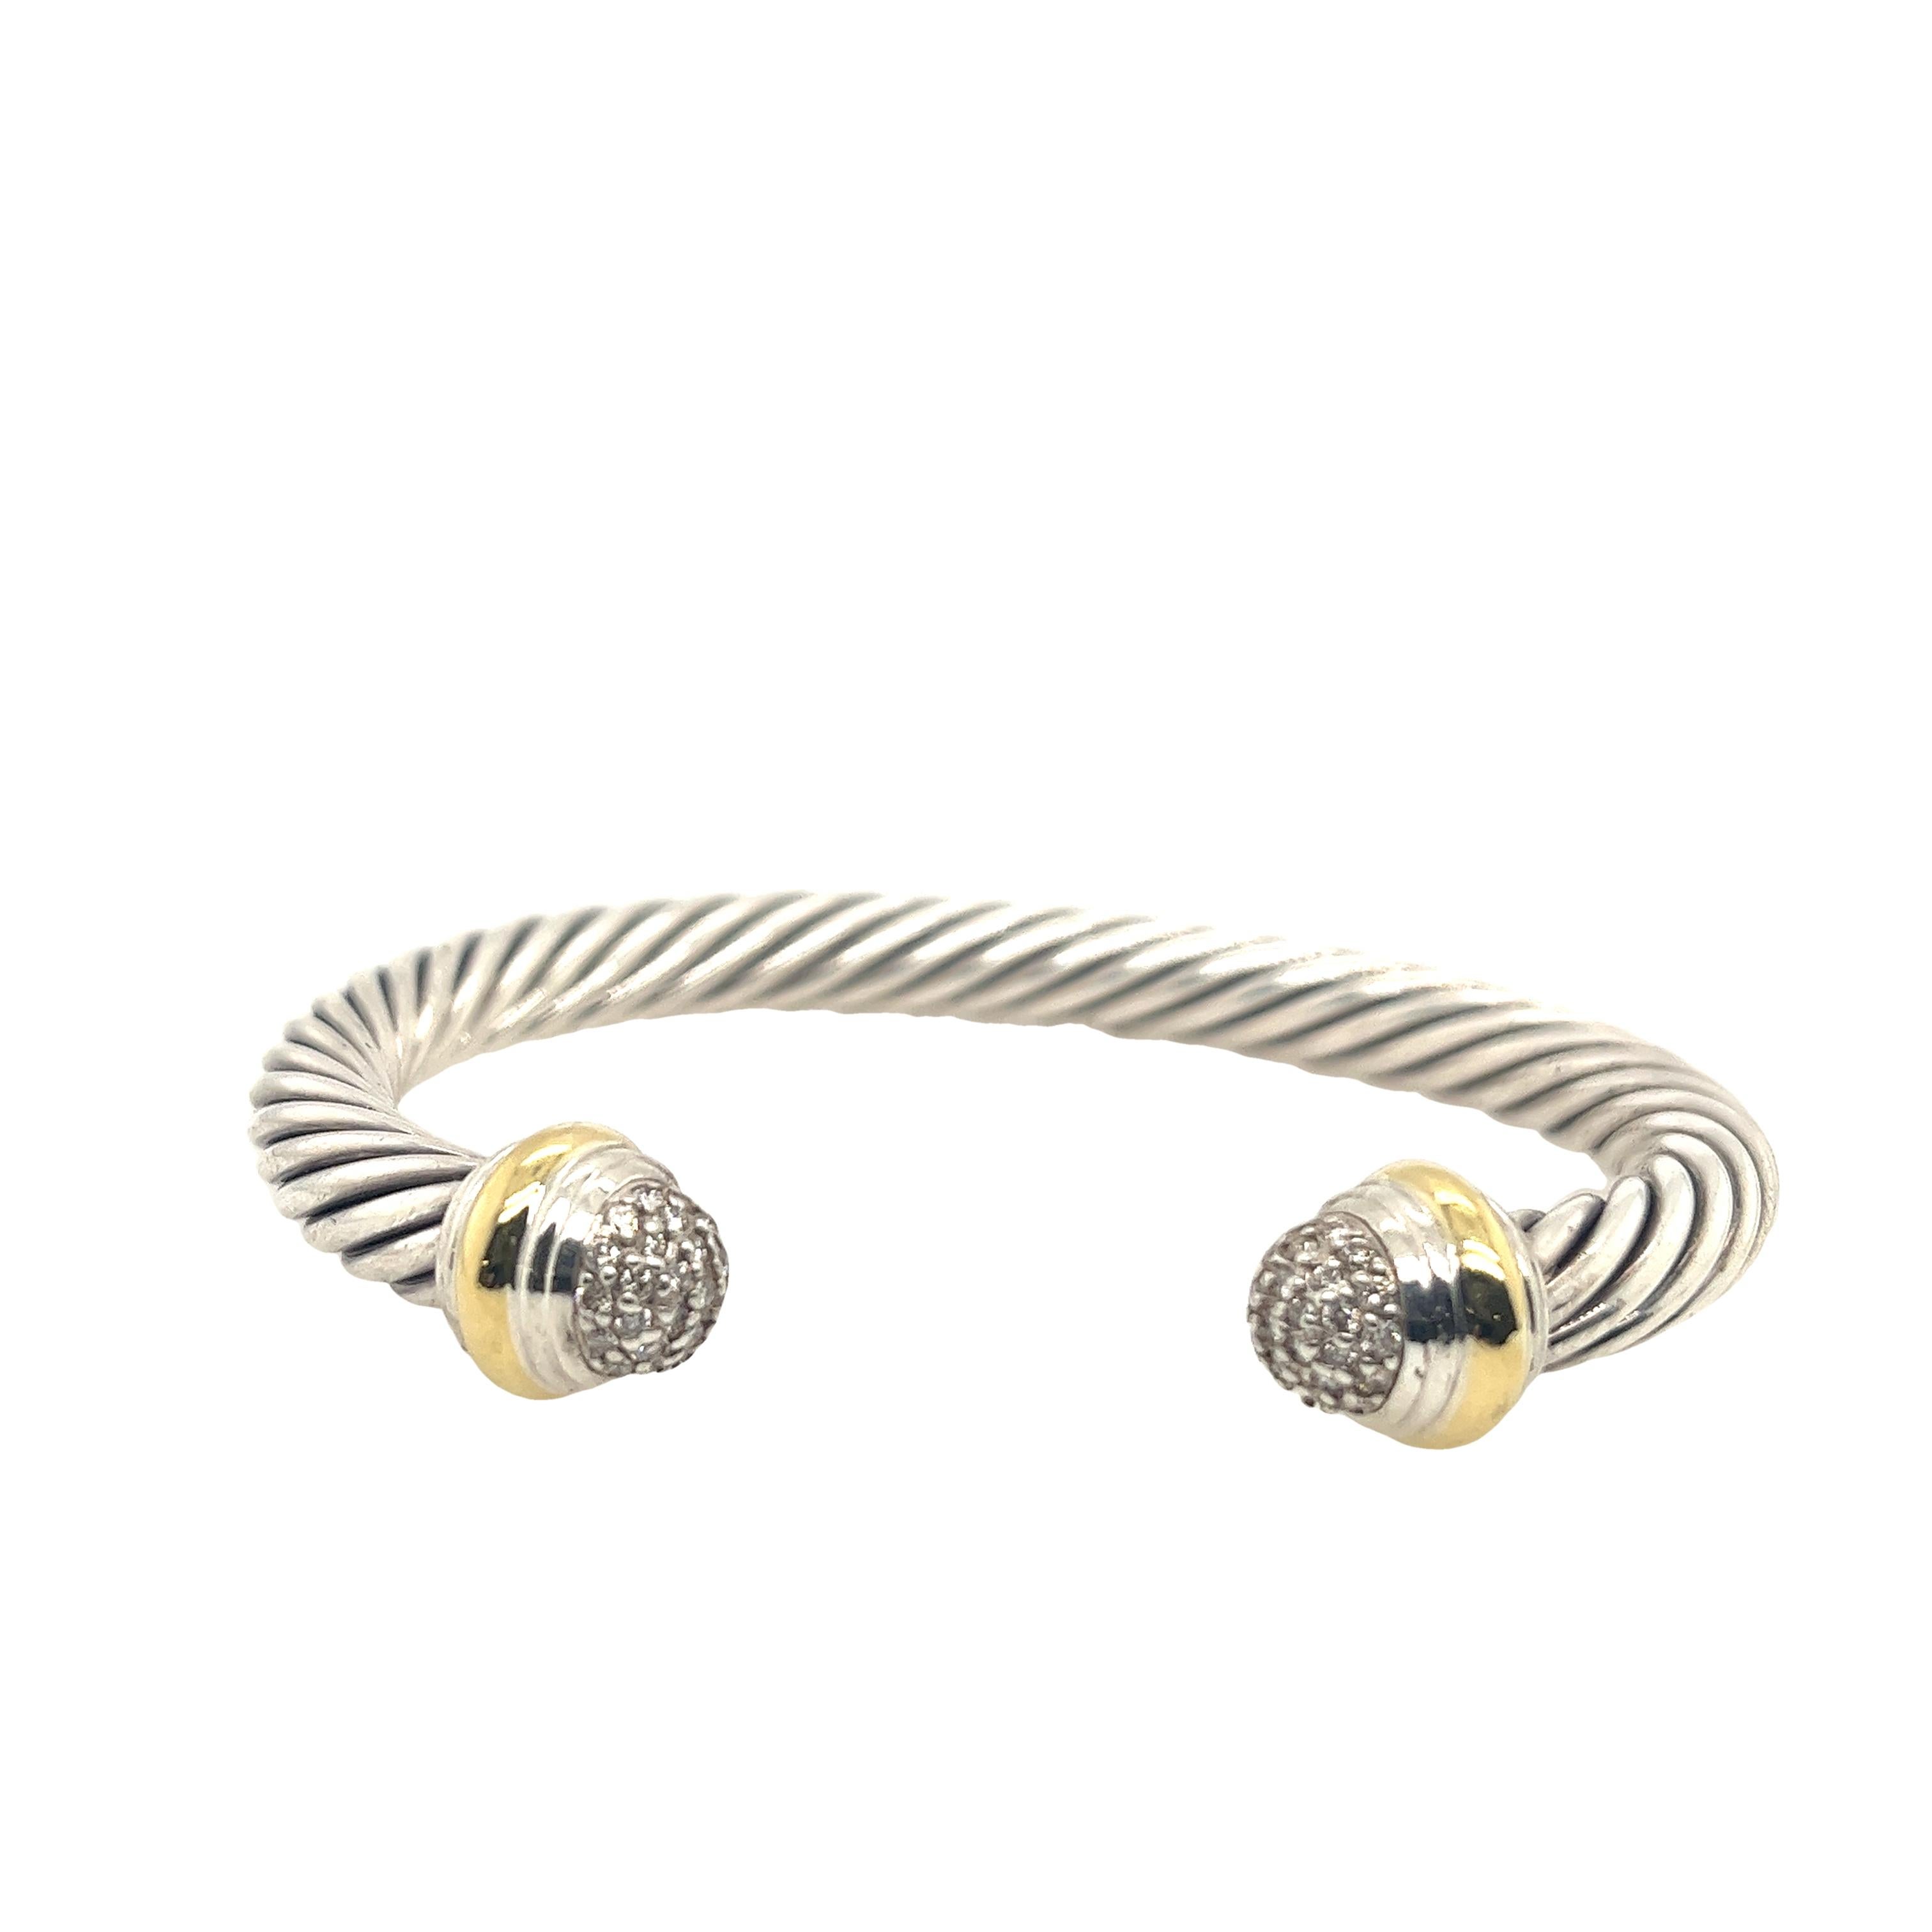 Introducing the exquisite David Yurman sterling silver and 18ct yellow gold  cable bangle with diamond end caps, a true masterpiece that combines elegance and sophistication.
Sterling silver with 18ct yellow gold diamond end caps
46 round brilliant